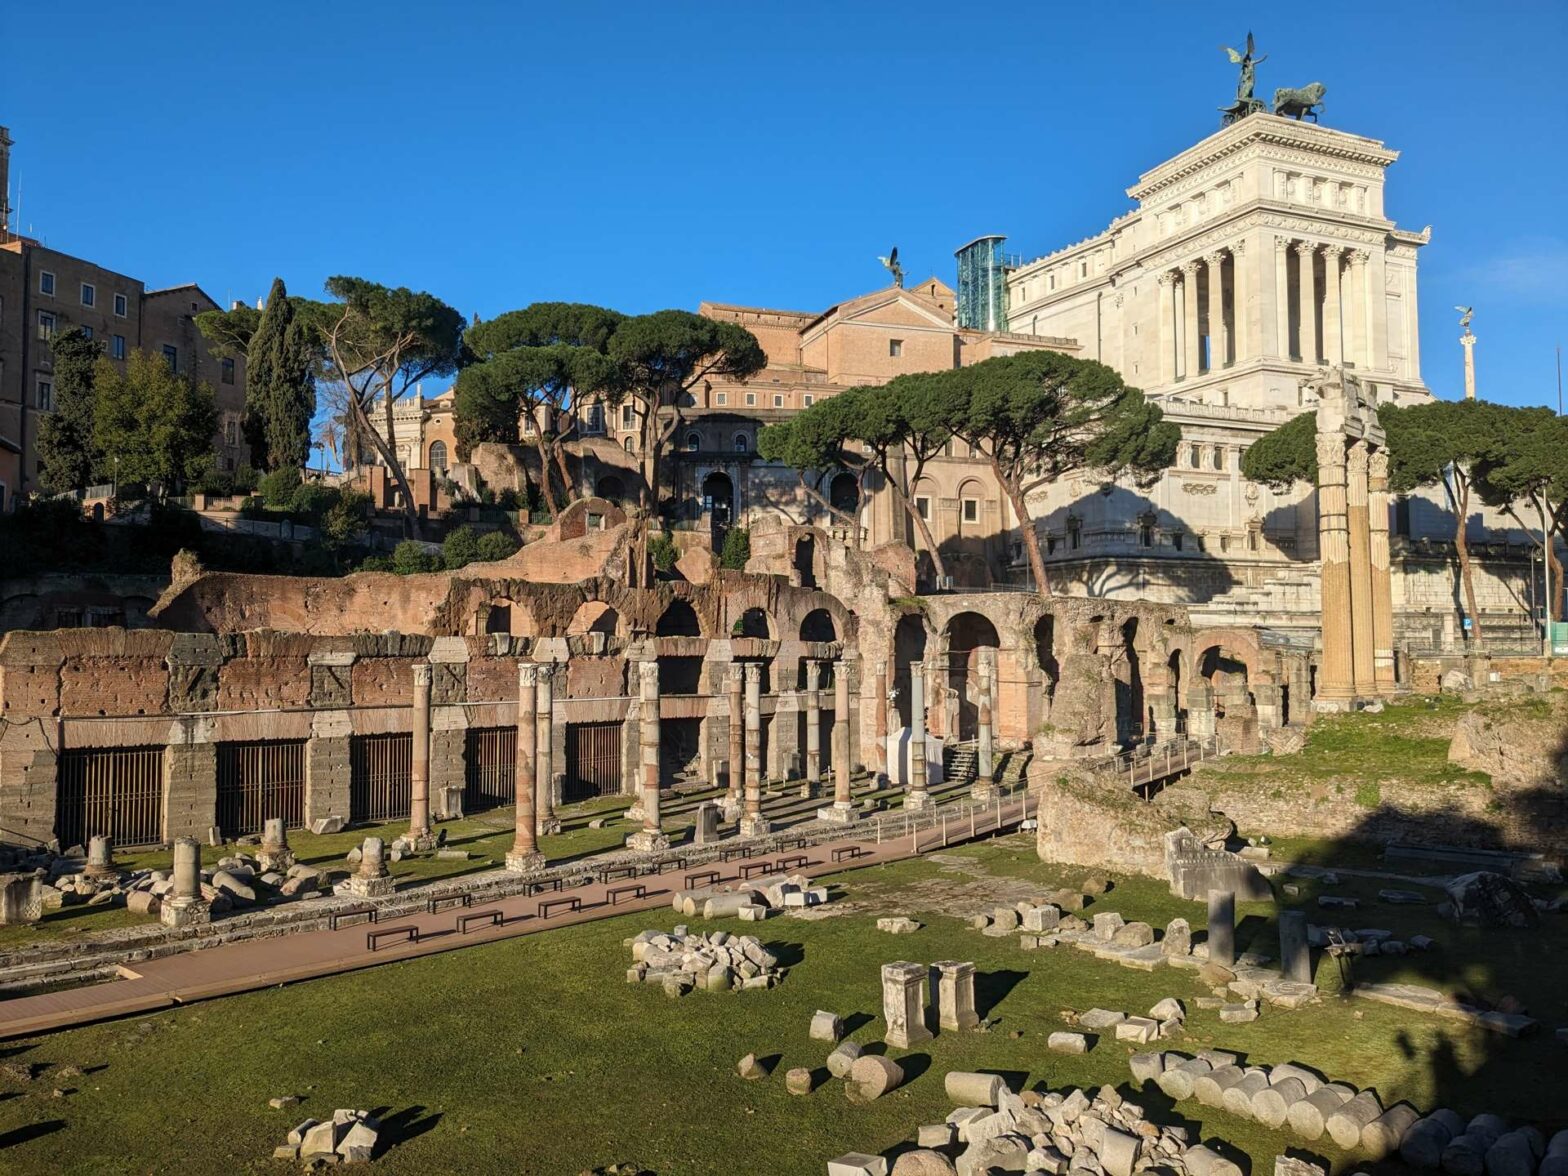 Walking through the heart of Ancient Rome with a view of the Roman Forum and the Monument to Victor Emmanuel II